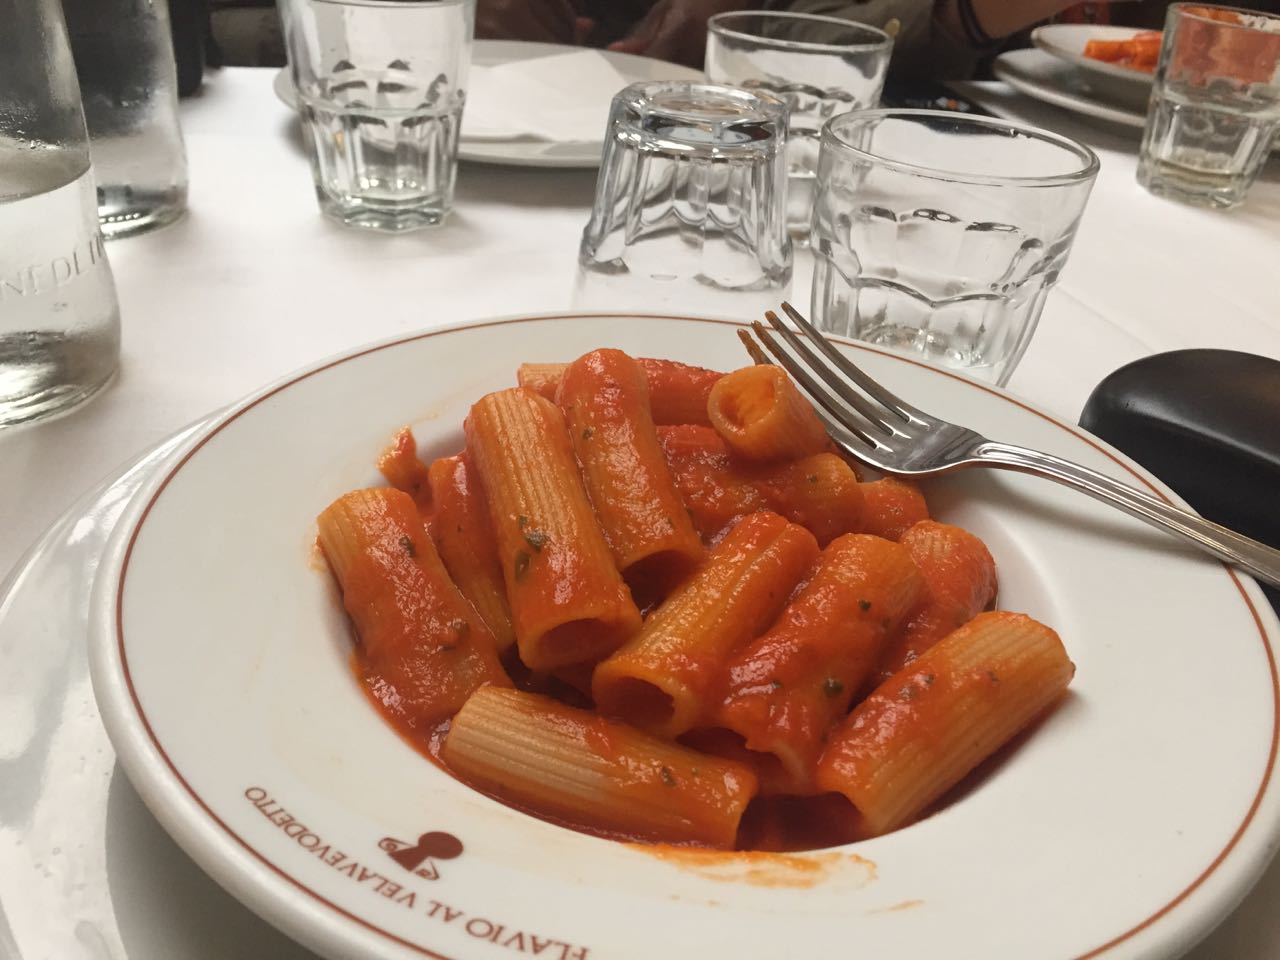 This is pasta at Flávio Al Velavevodetto, one of the most authentic Italian restaurants you will ever see in Rome. It is in a working class area and stays pack. A bit of advice, do not order the spaghetti with meatballs, the cook will leave the kitchen and eject you. Spaghetti and Meatballs is not done in Rome